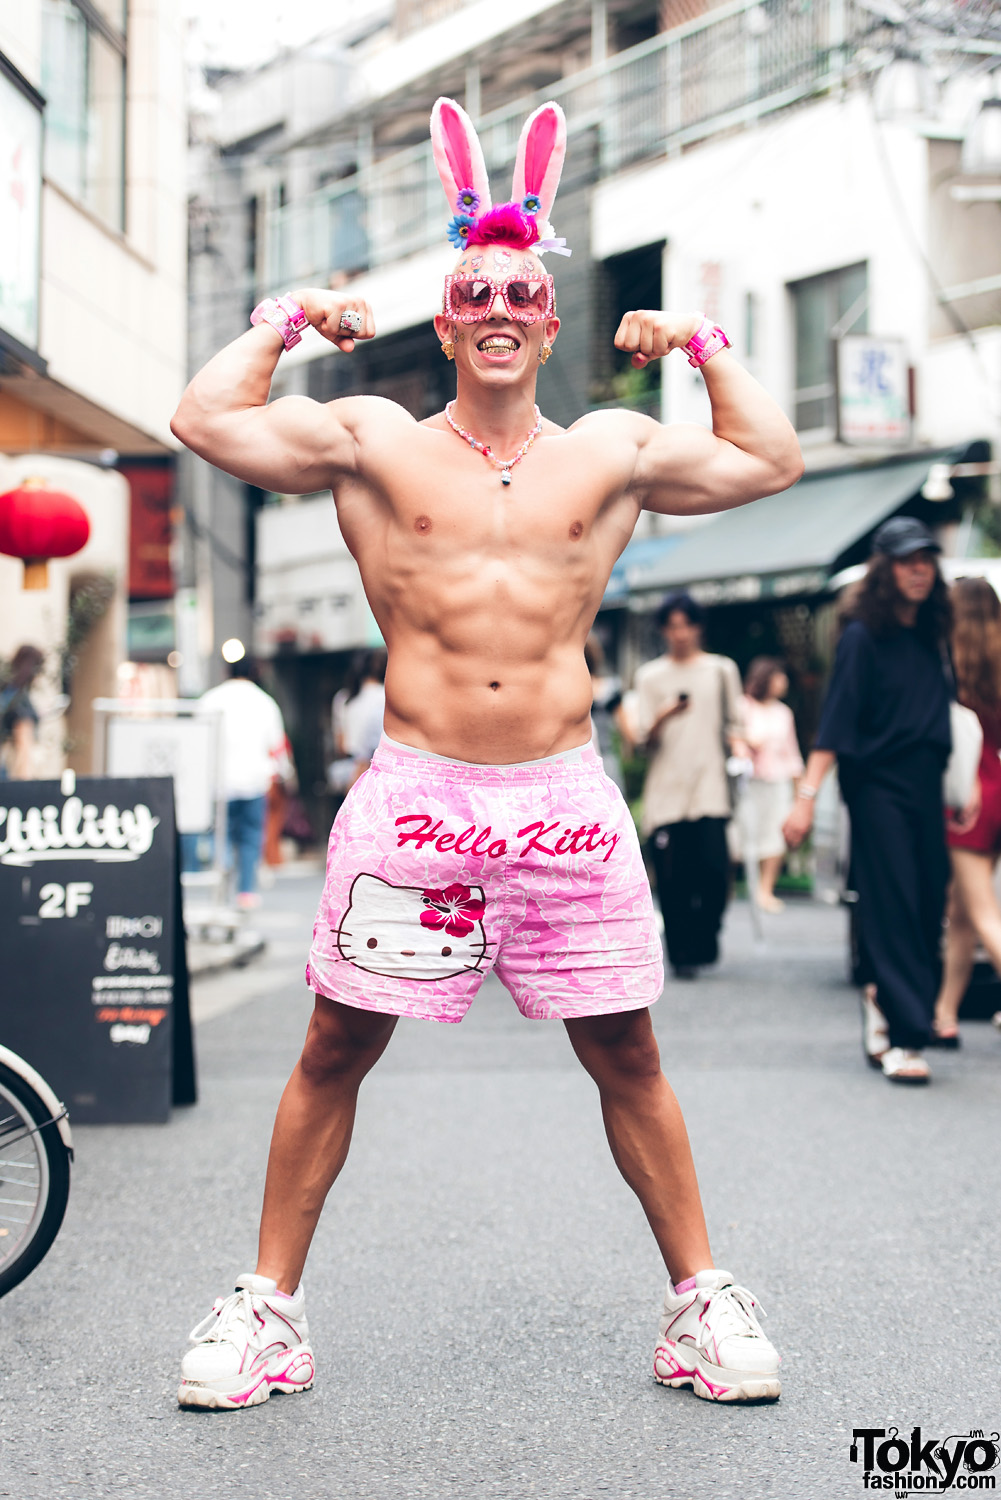 Candy Ken in Harajuku With Big Muscles, Grills & Pink Hello Kitty Fashion